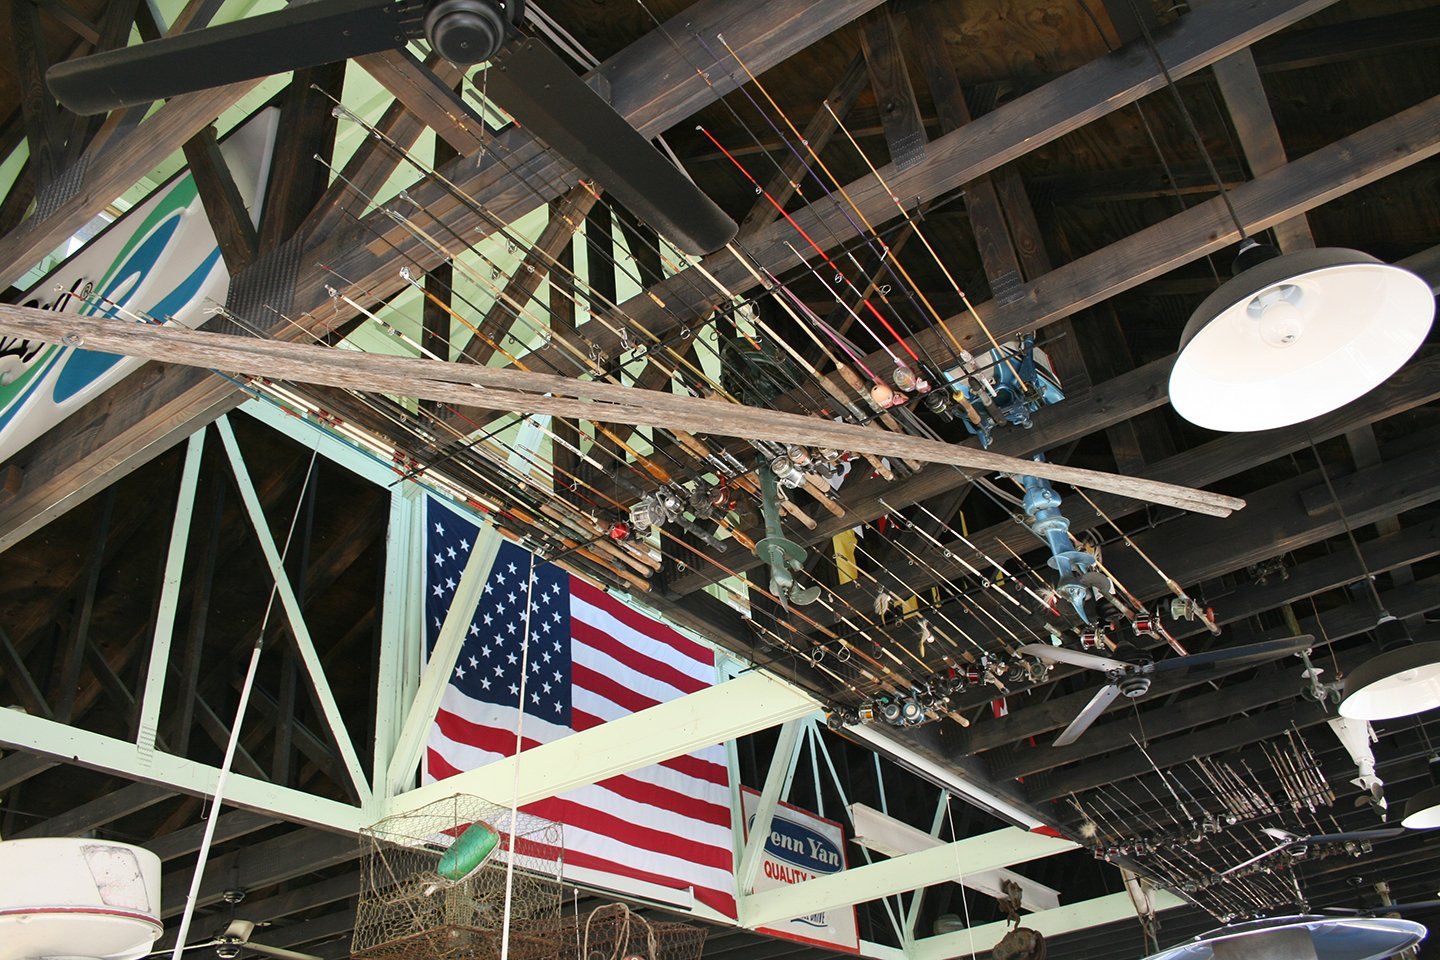 rods hanging from ceiling-Boat House